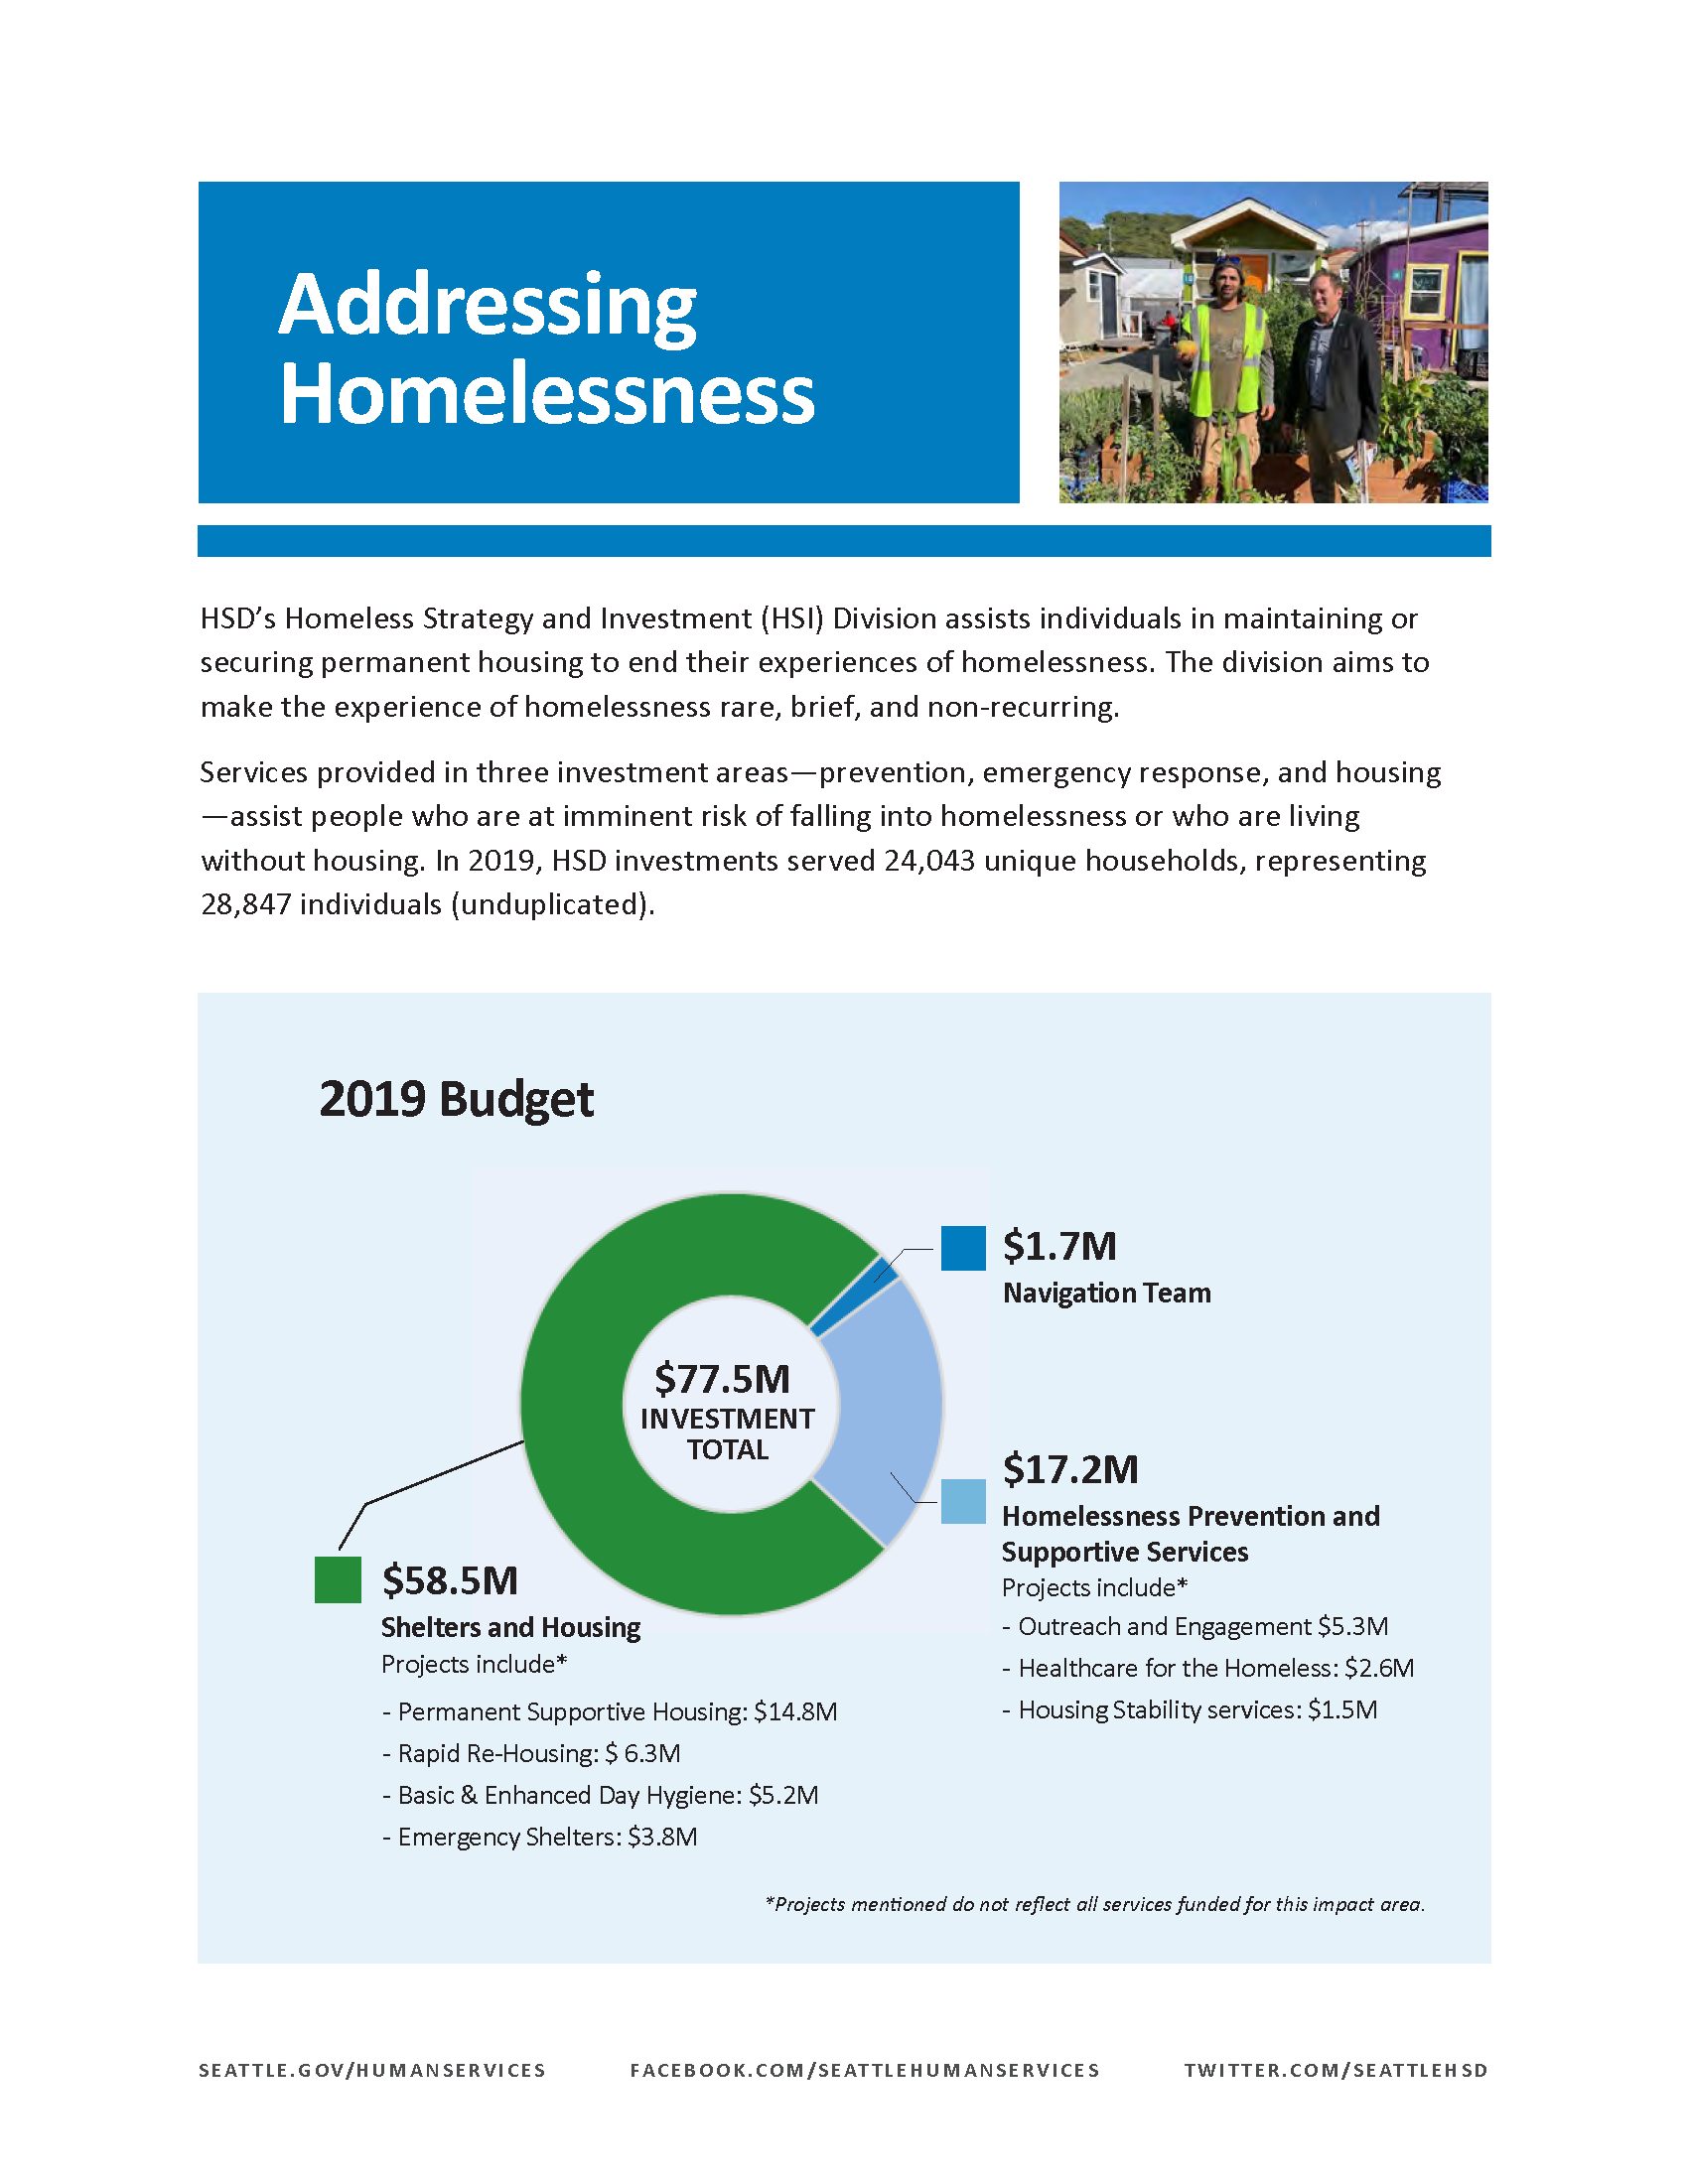 Addressing Homelessness Annual Report One-Pager